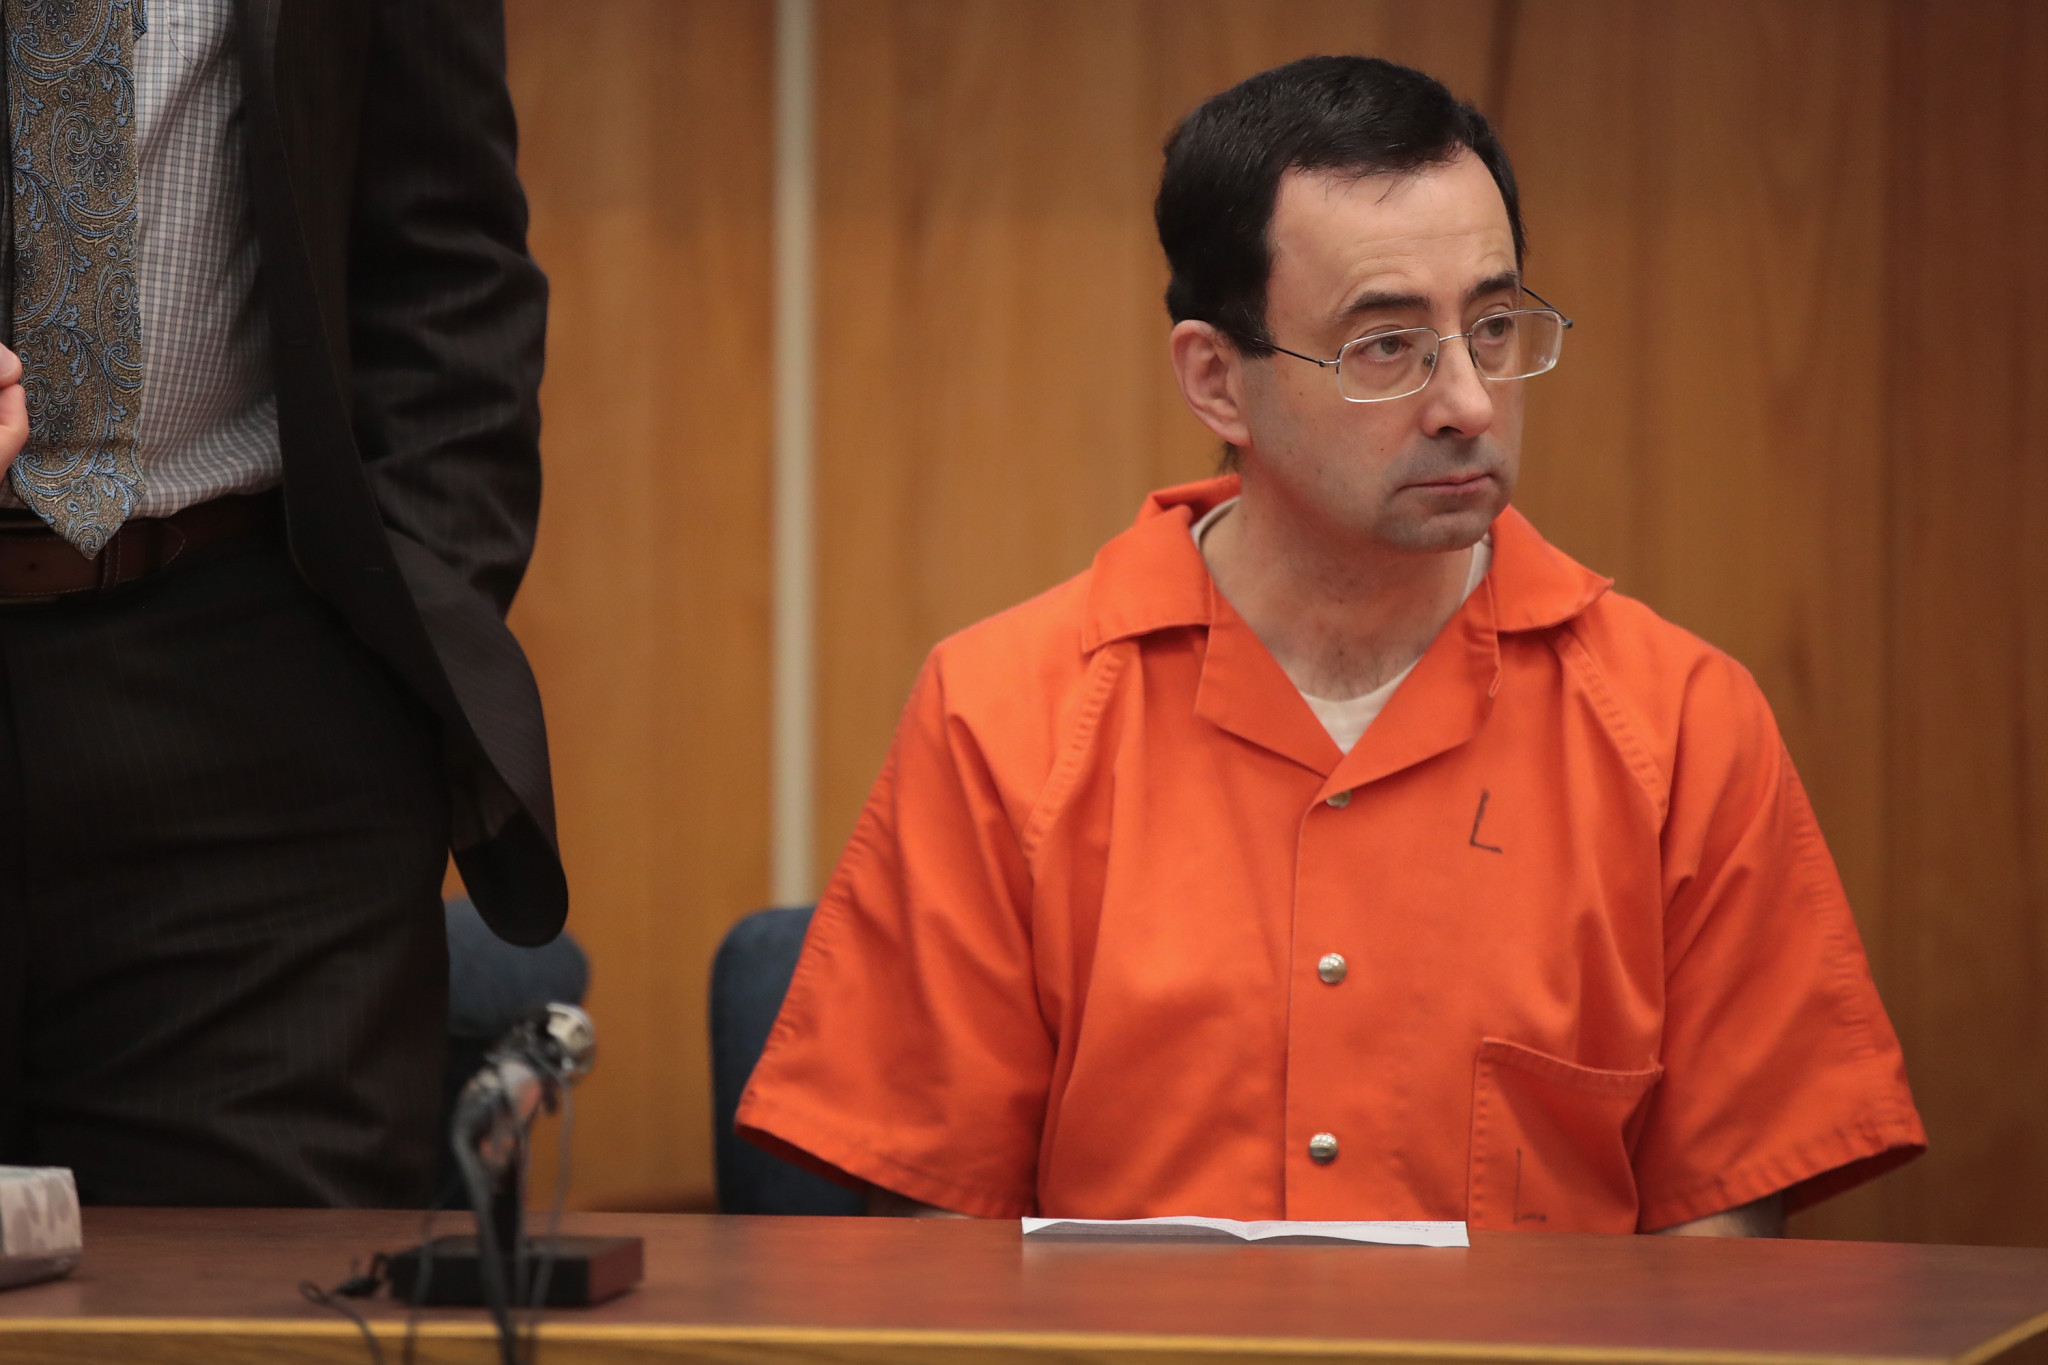 Disgraced former USA Gymnastics team doctor Larry Nassar was recently sentenced to a maximum of 300 years in prison across several trials for sexual abuse offences ©Getty Images